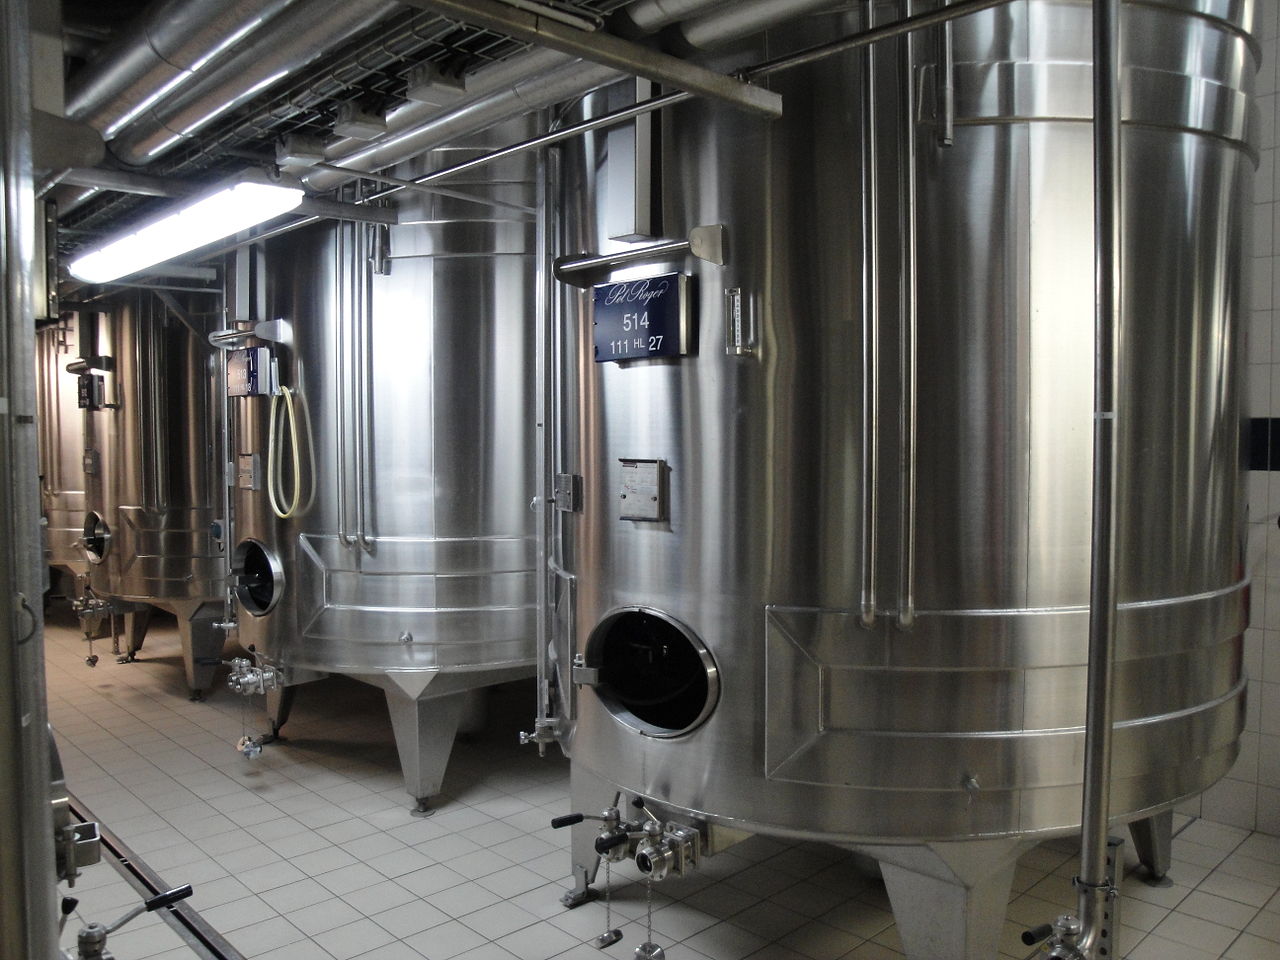 Industrial stainless steel tanks should be passivated and chemically cleaned.